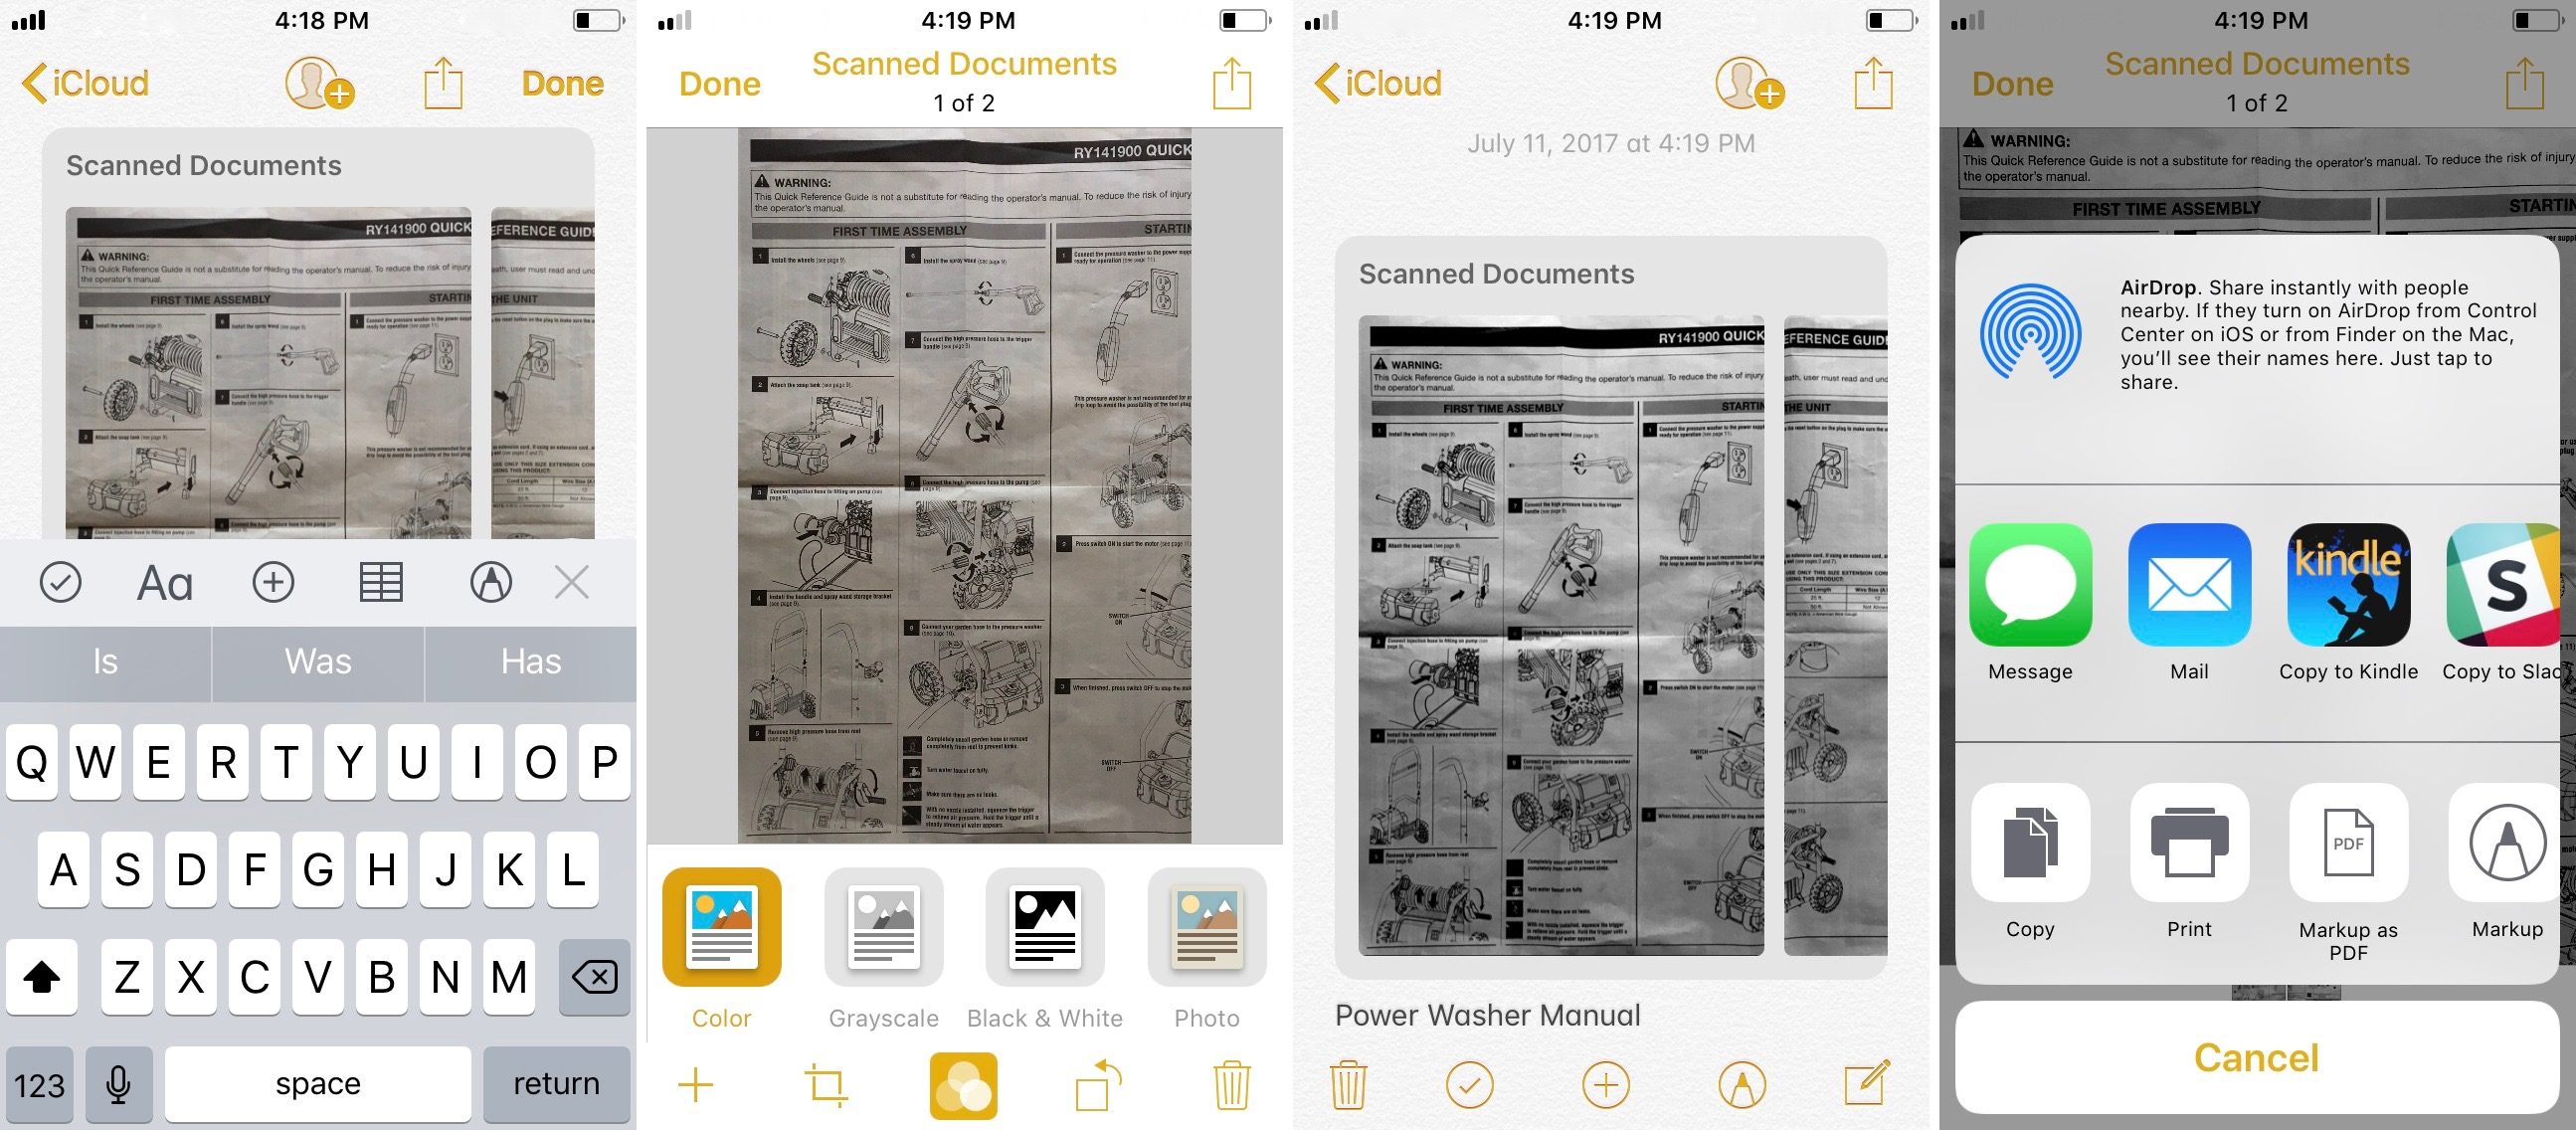 How to Use Apple’s Document Scanner in iOS 11?